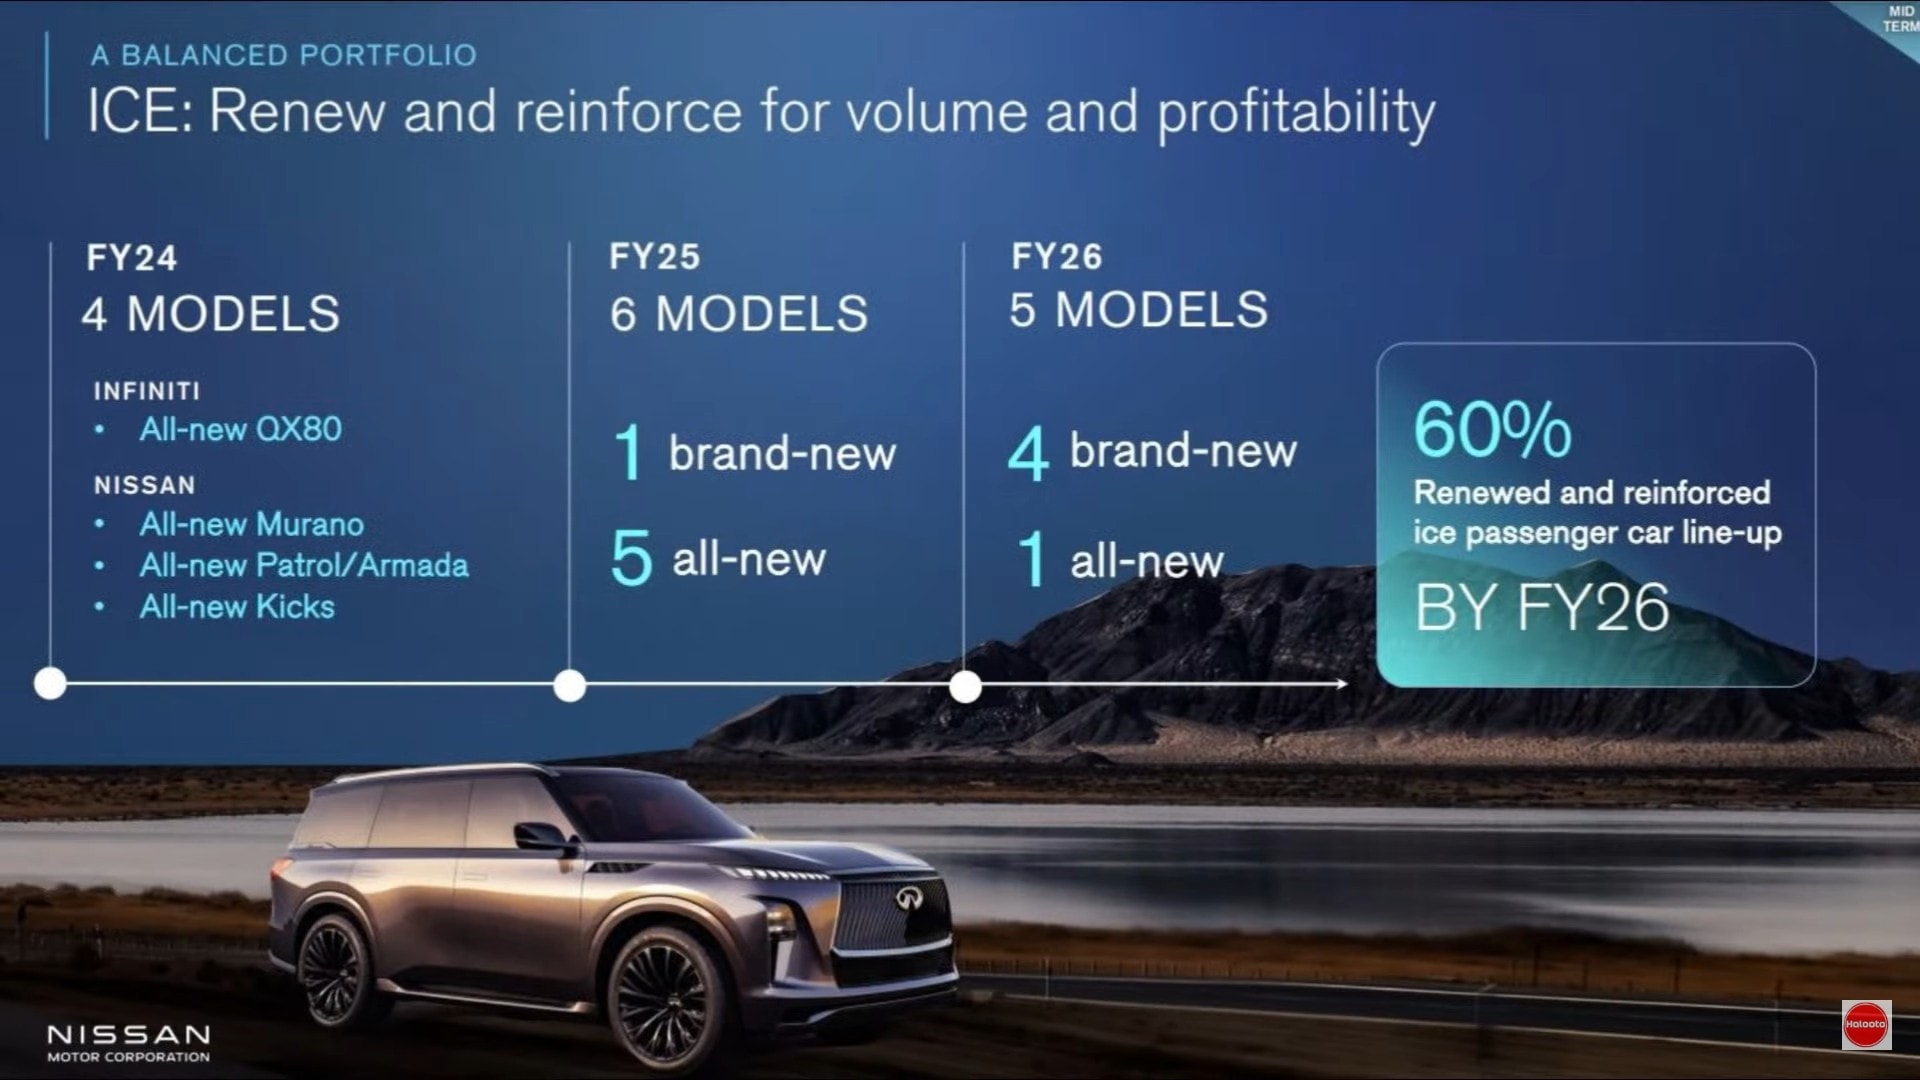 Nissan's Growth Trajectory New Models and Market Strategies